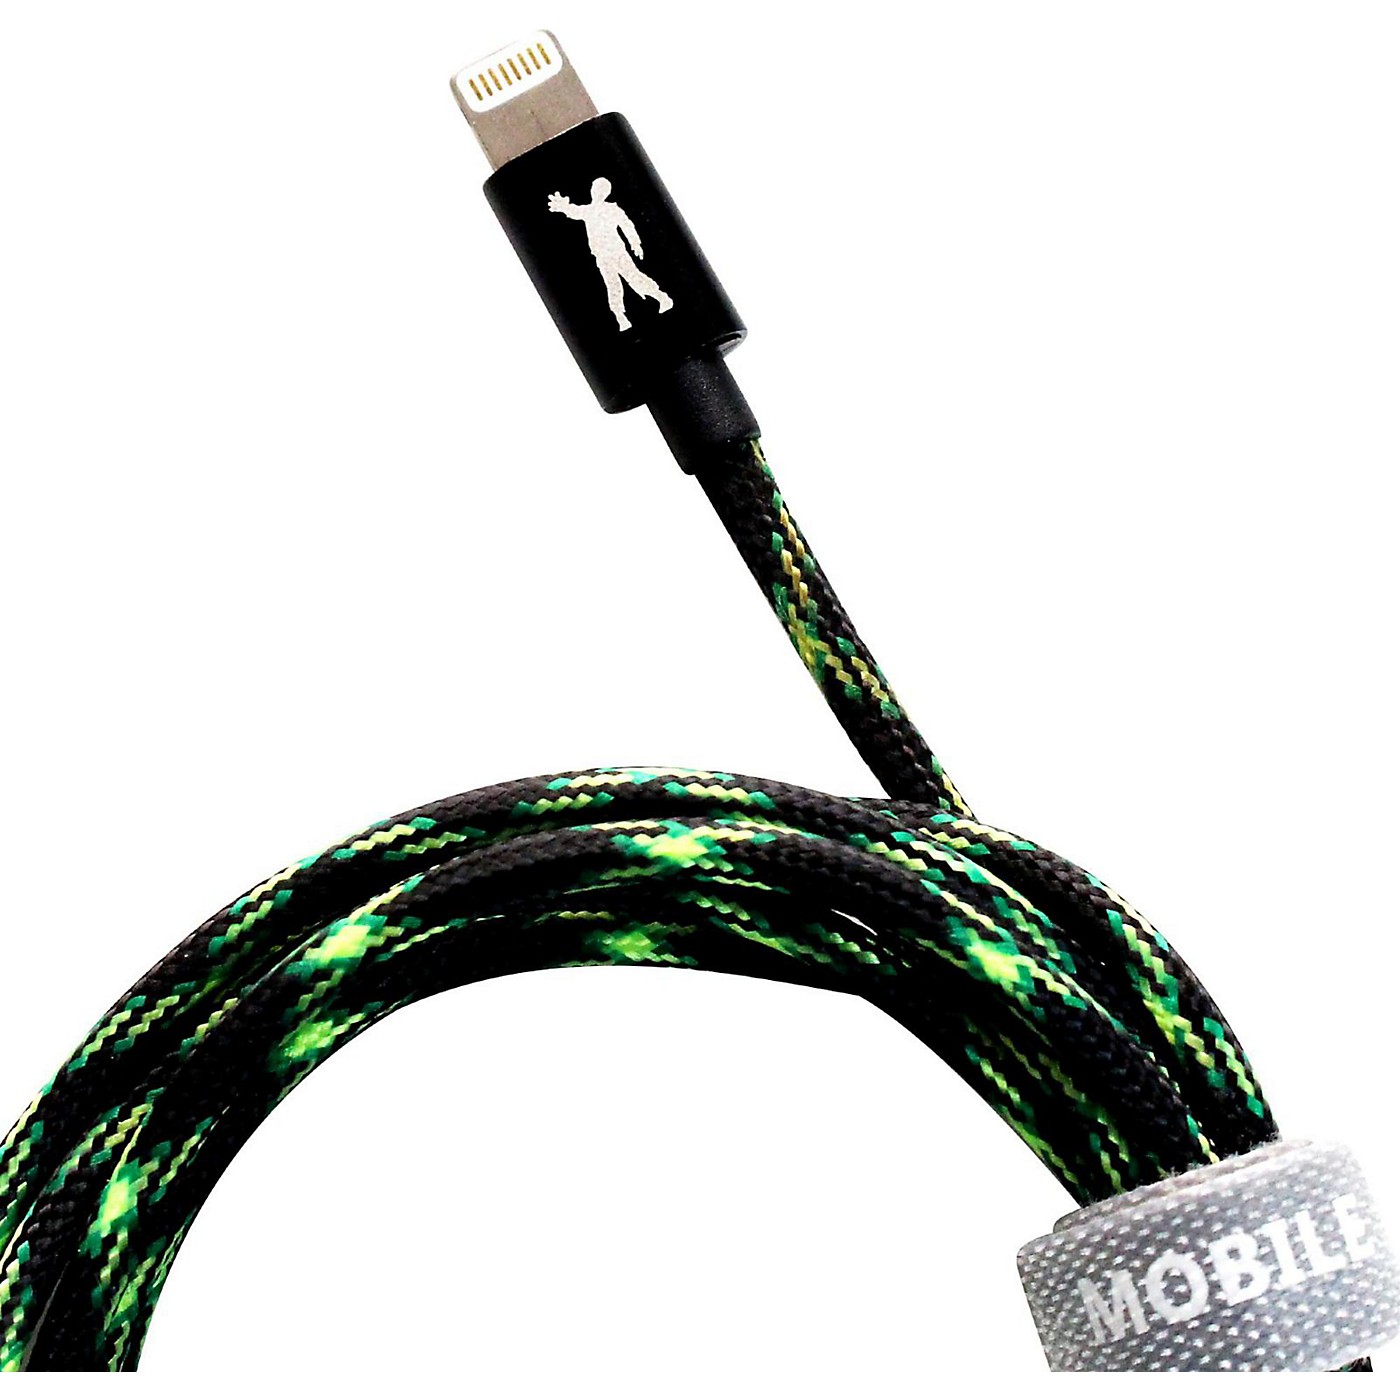 Tera Grand Mobile Undead - Apple MFi Certified - Lightning to USB Zombie Cable thumbnail